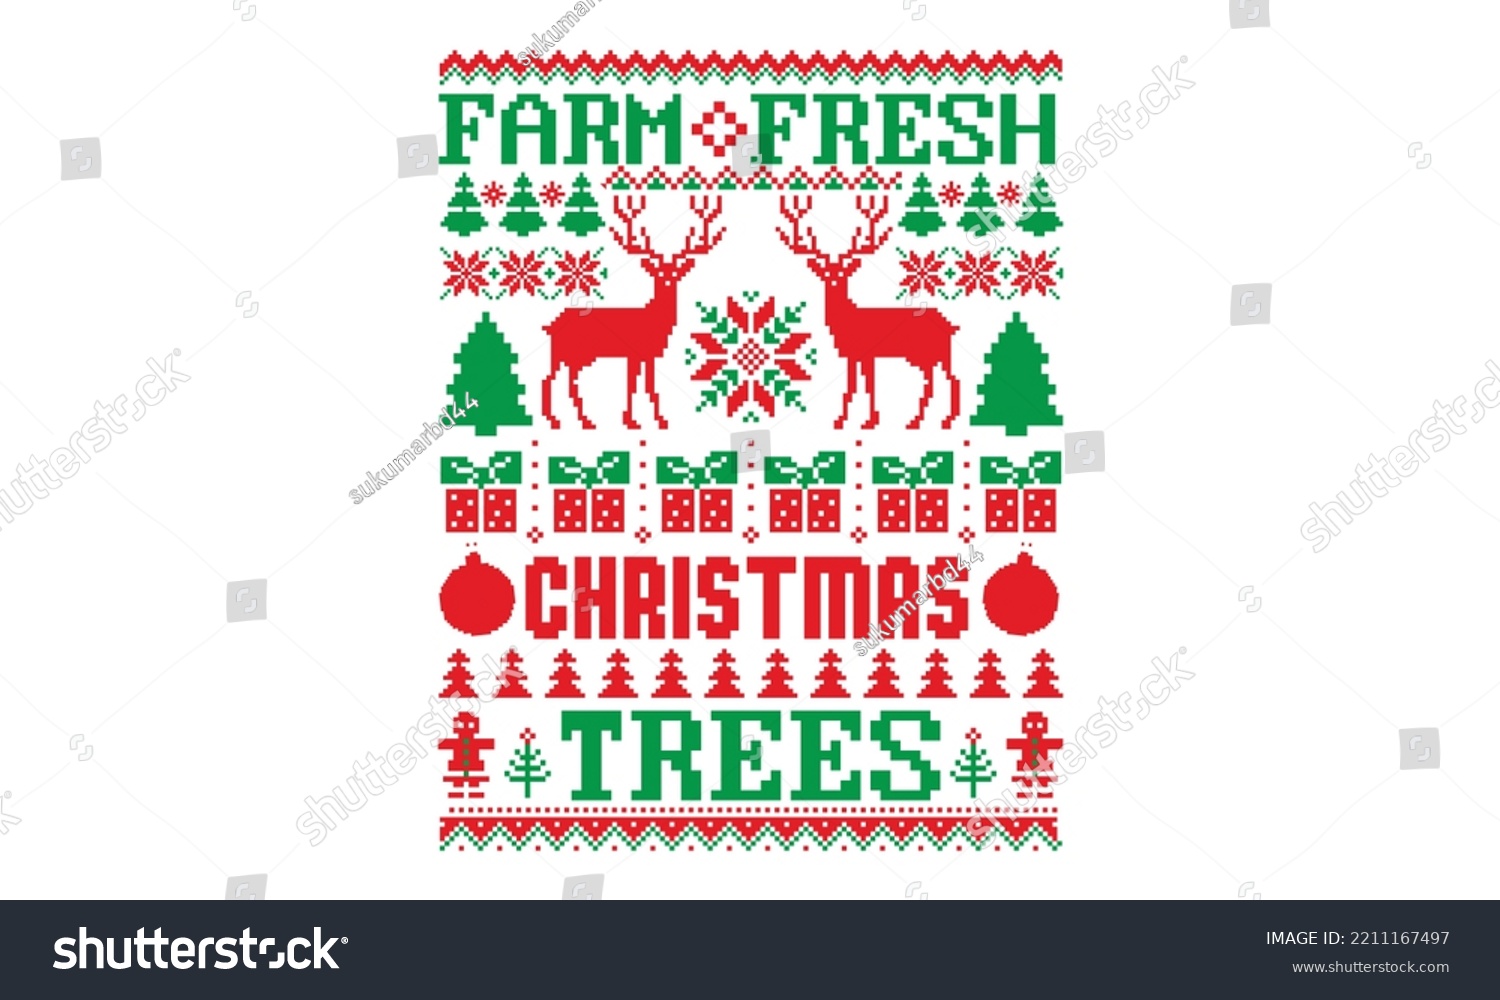 SVG of Farm fresh Christmas trees - Ugly Christmas Sweater T-shirt Design, Hand drawn lettering phrase isolated on white background, eps, svg Files for Cutting svg